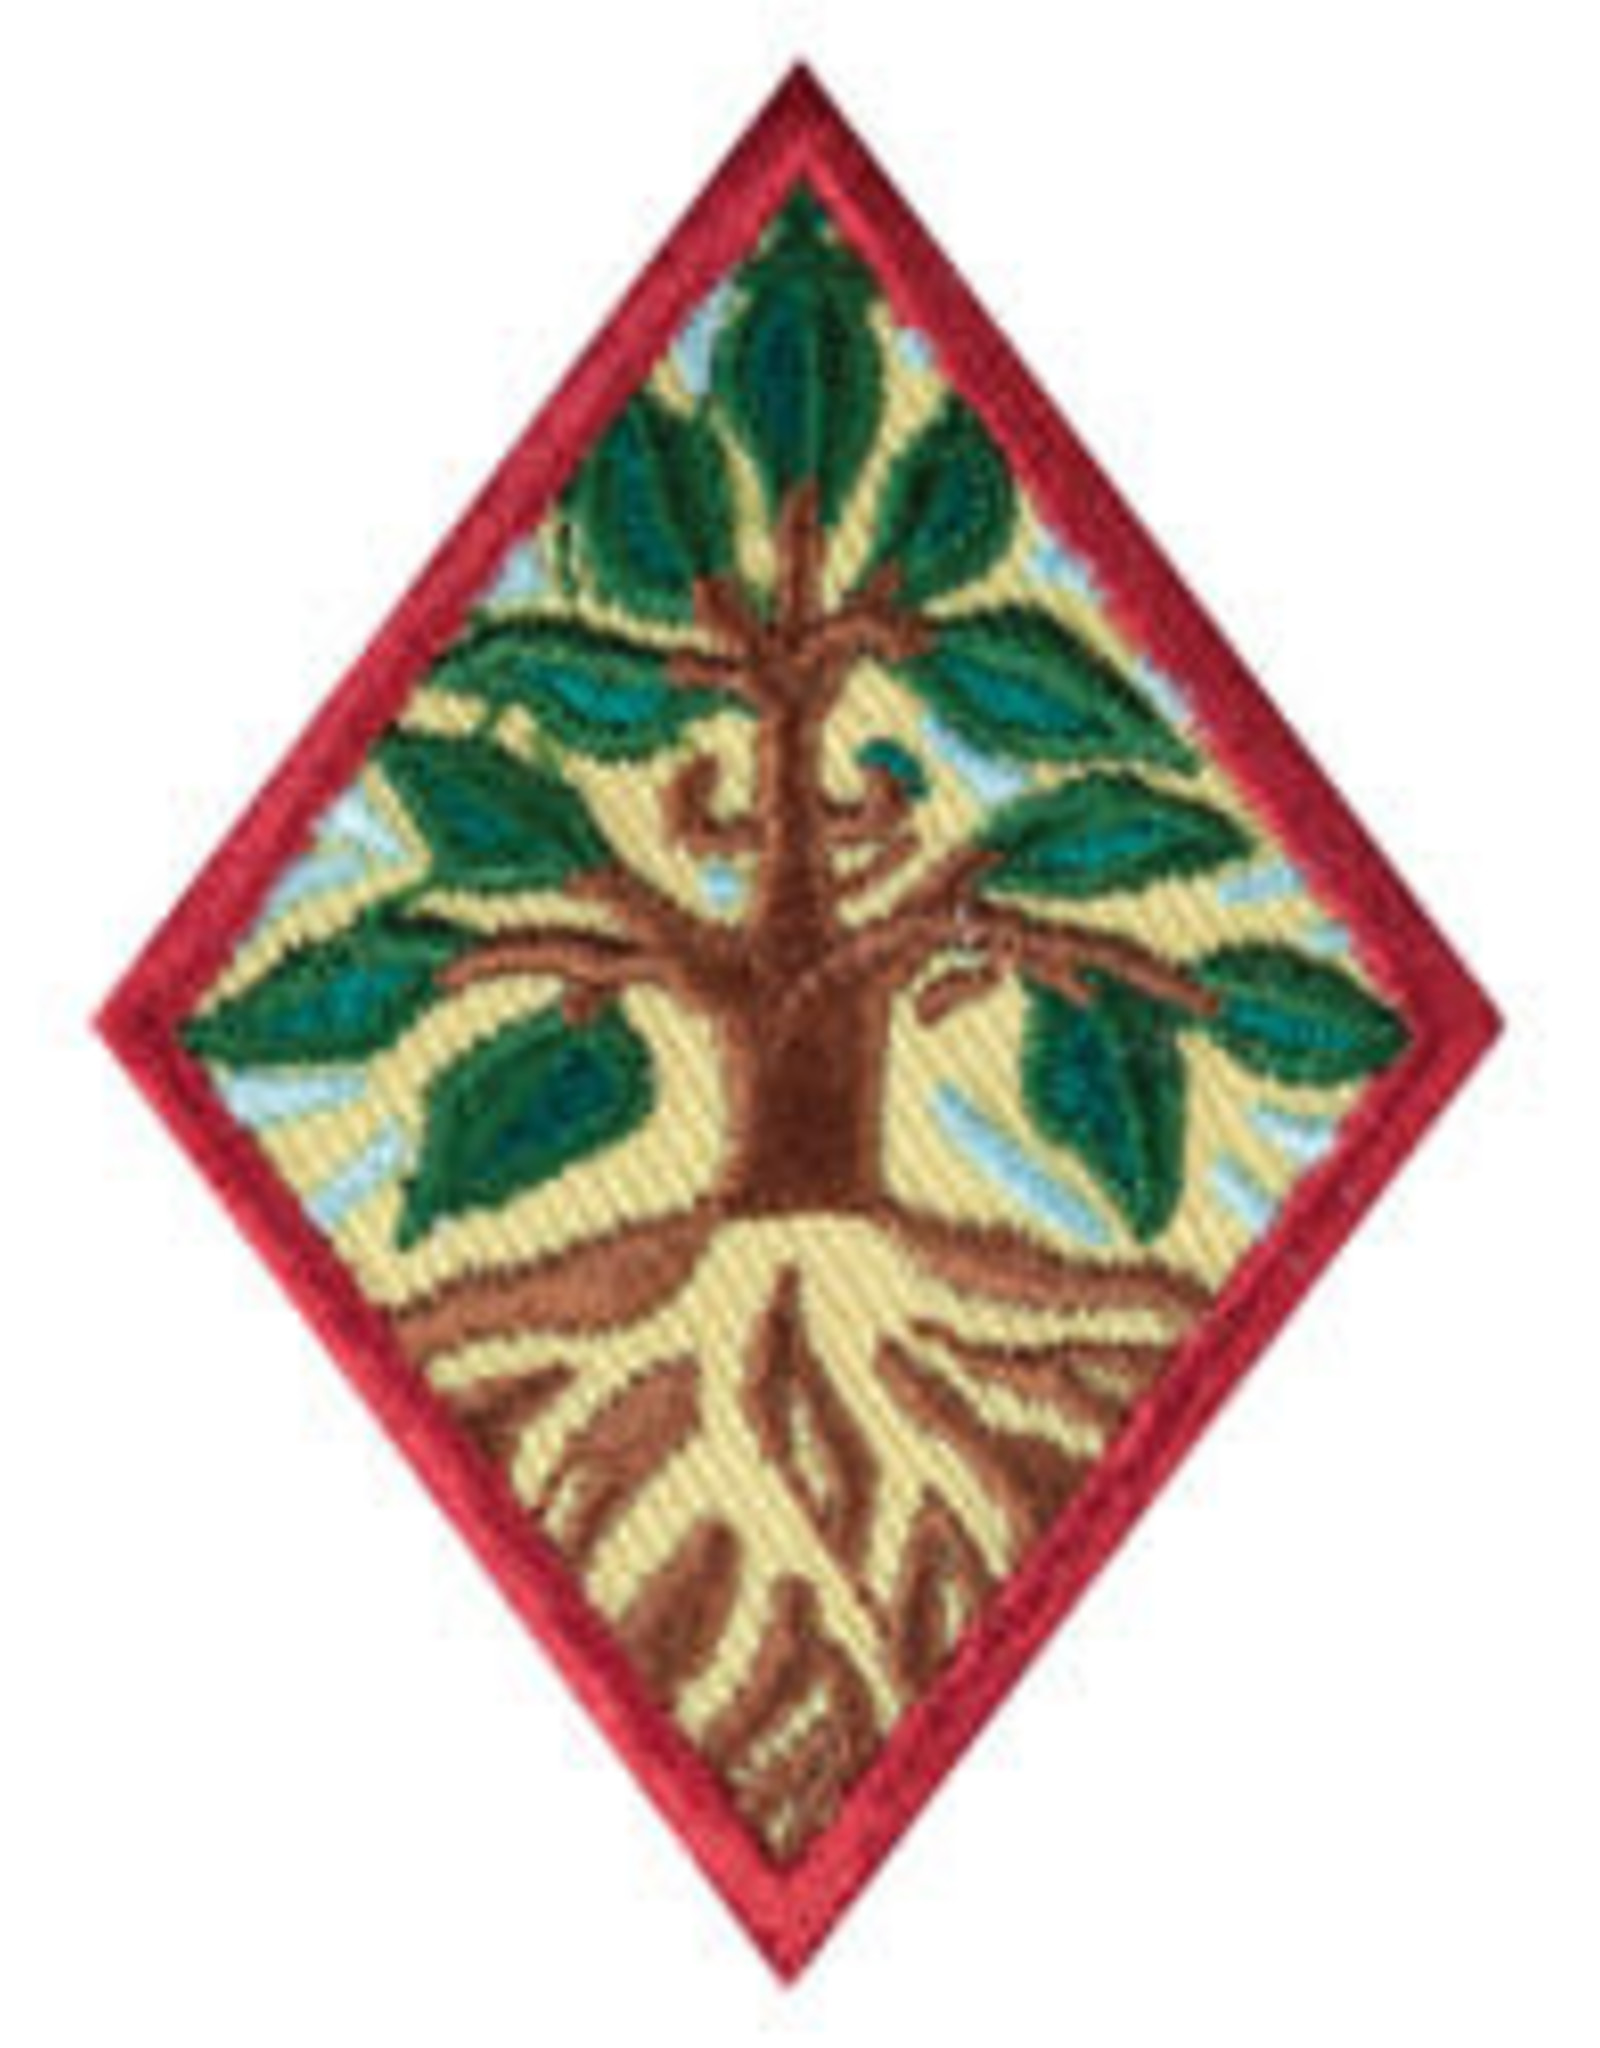 GIRL SCOUTS OF THE USA Cadette Trees Badge